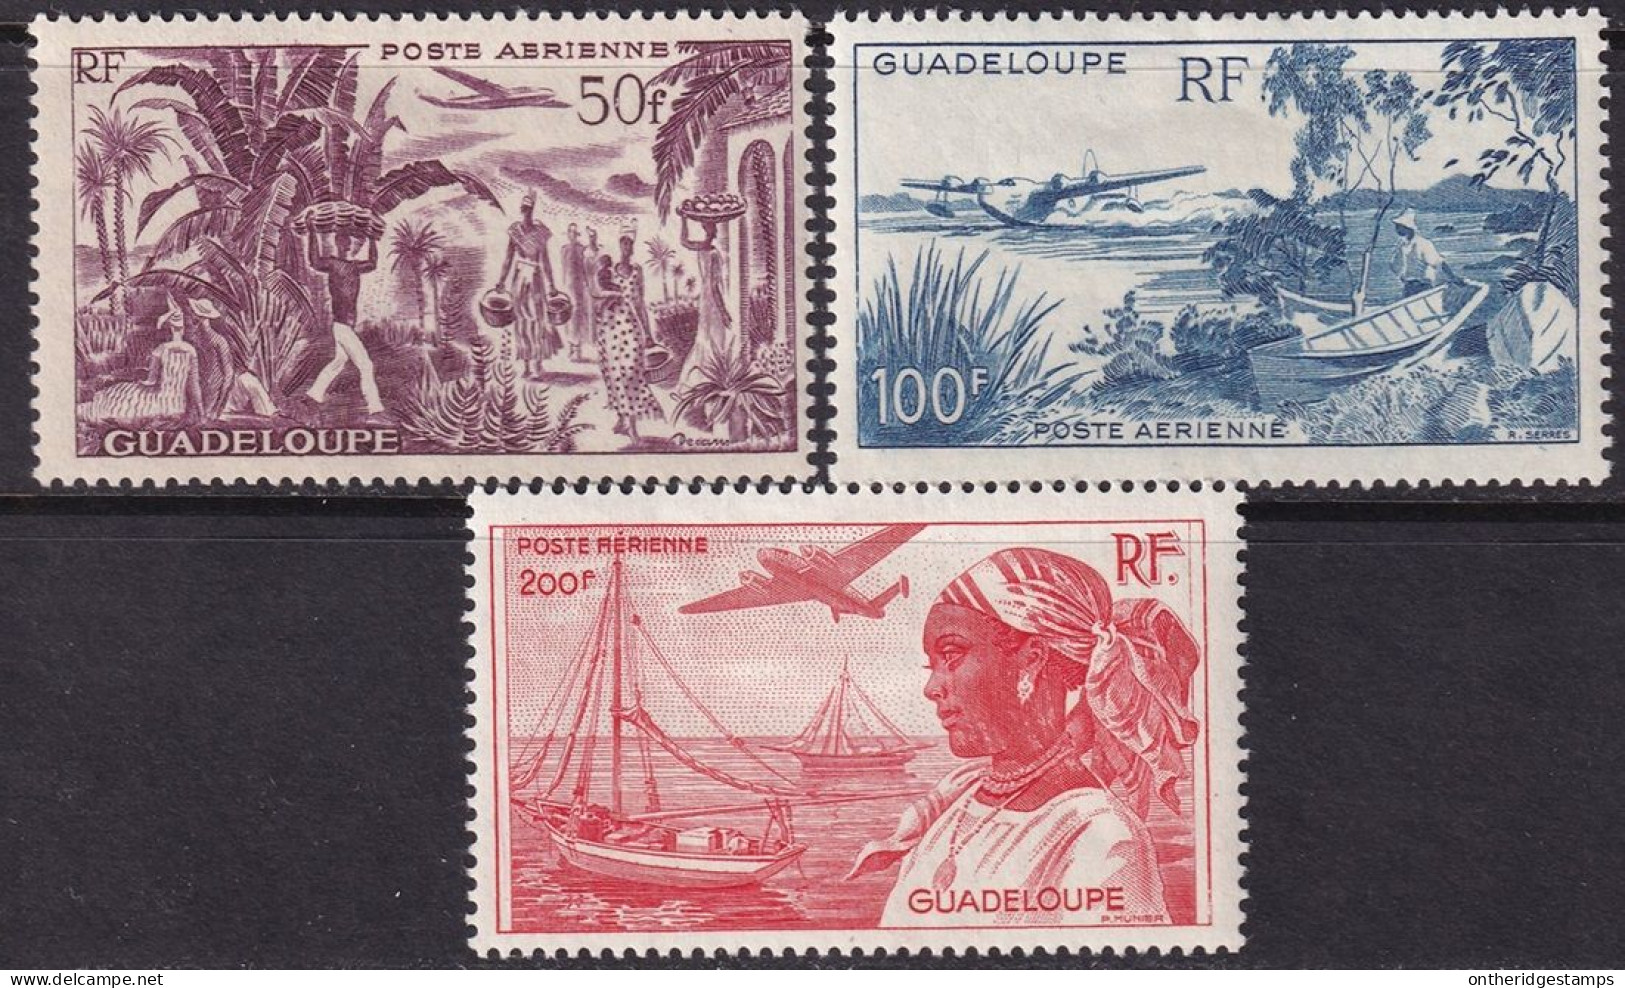 Guadeloupe 1947 Sc C10-2 Yt PA13-5 Air Post Set MH* Heavy Hinges - Luftpost